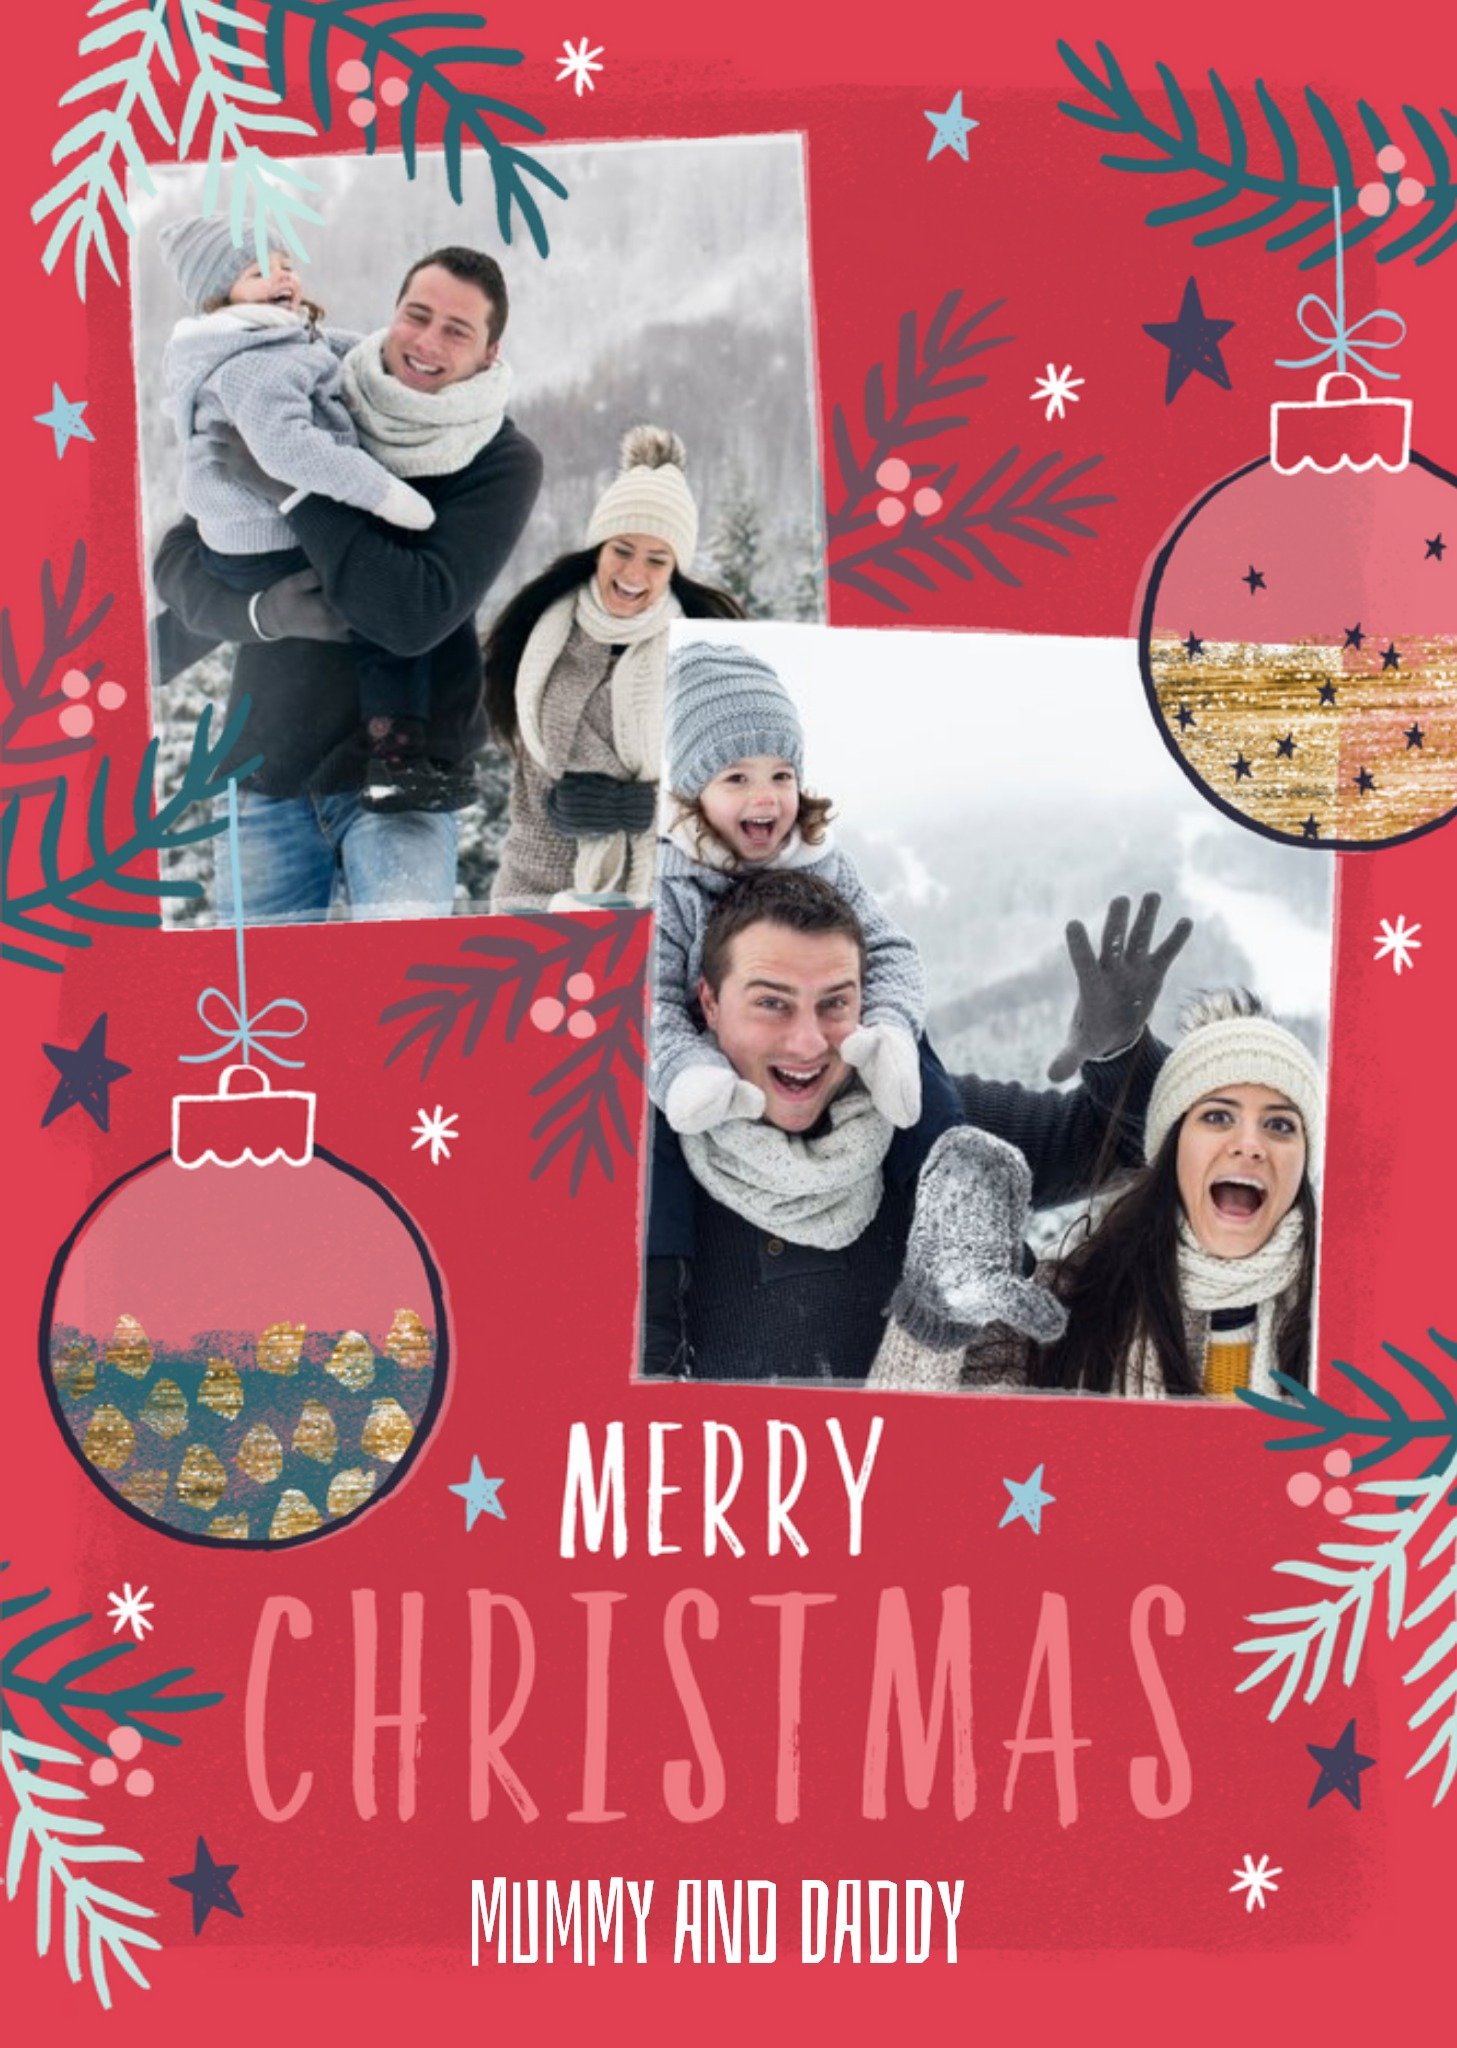 Moonpig Merry Christmas Mummy And Daddy Photo Upload Christmas Card, Large